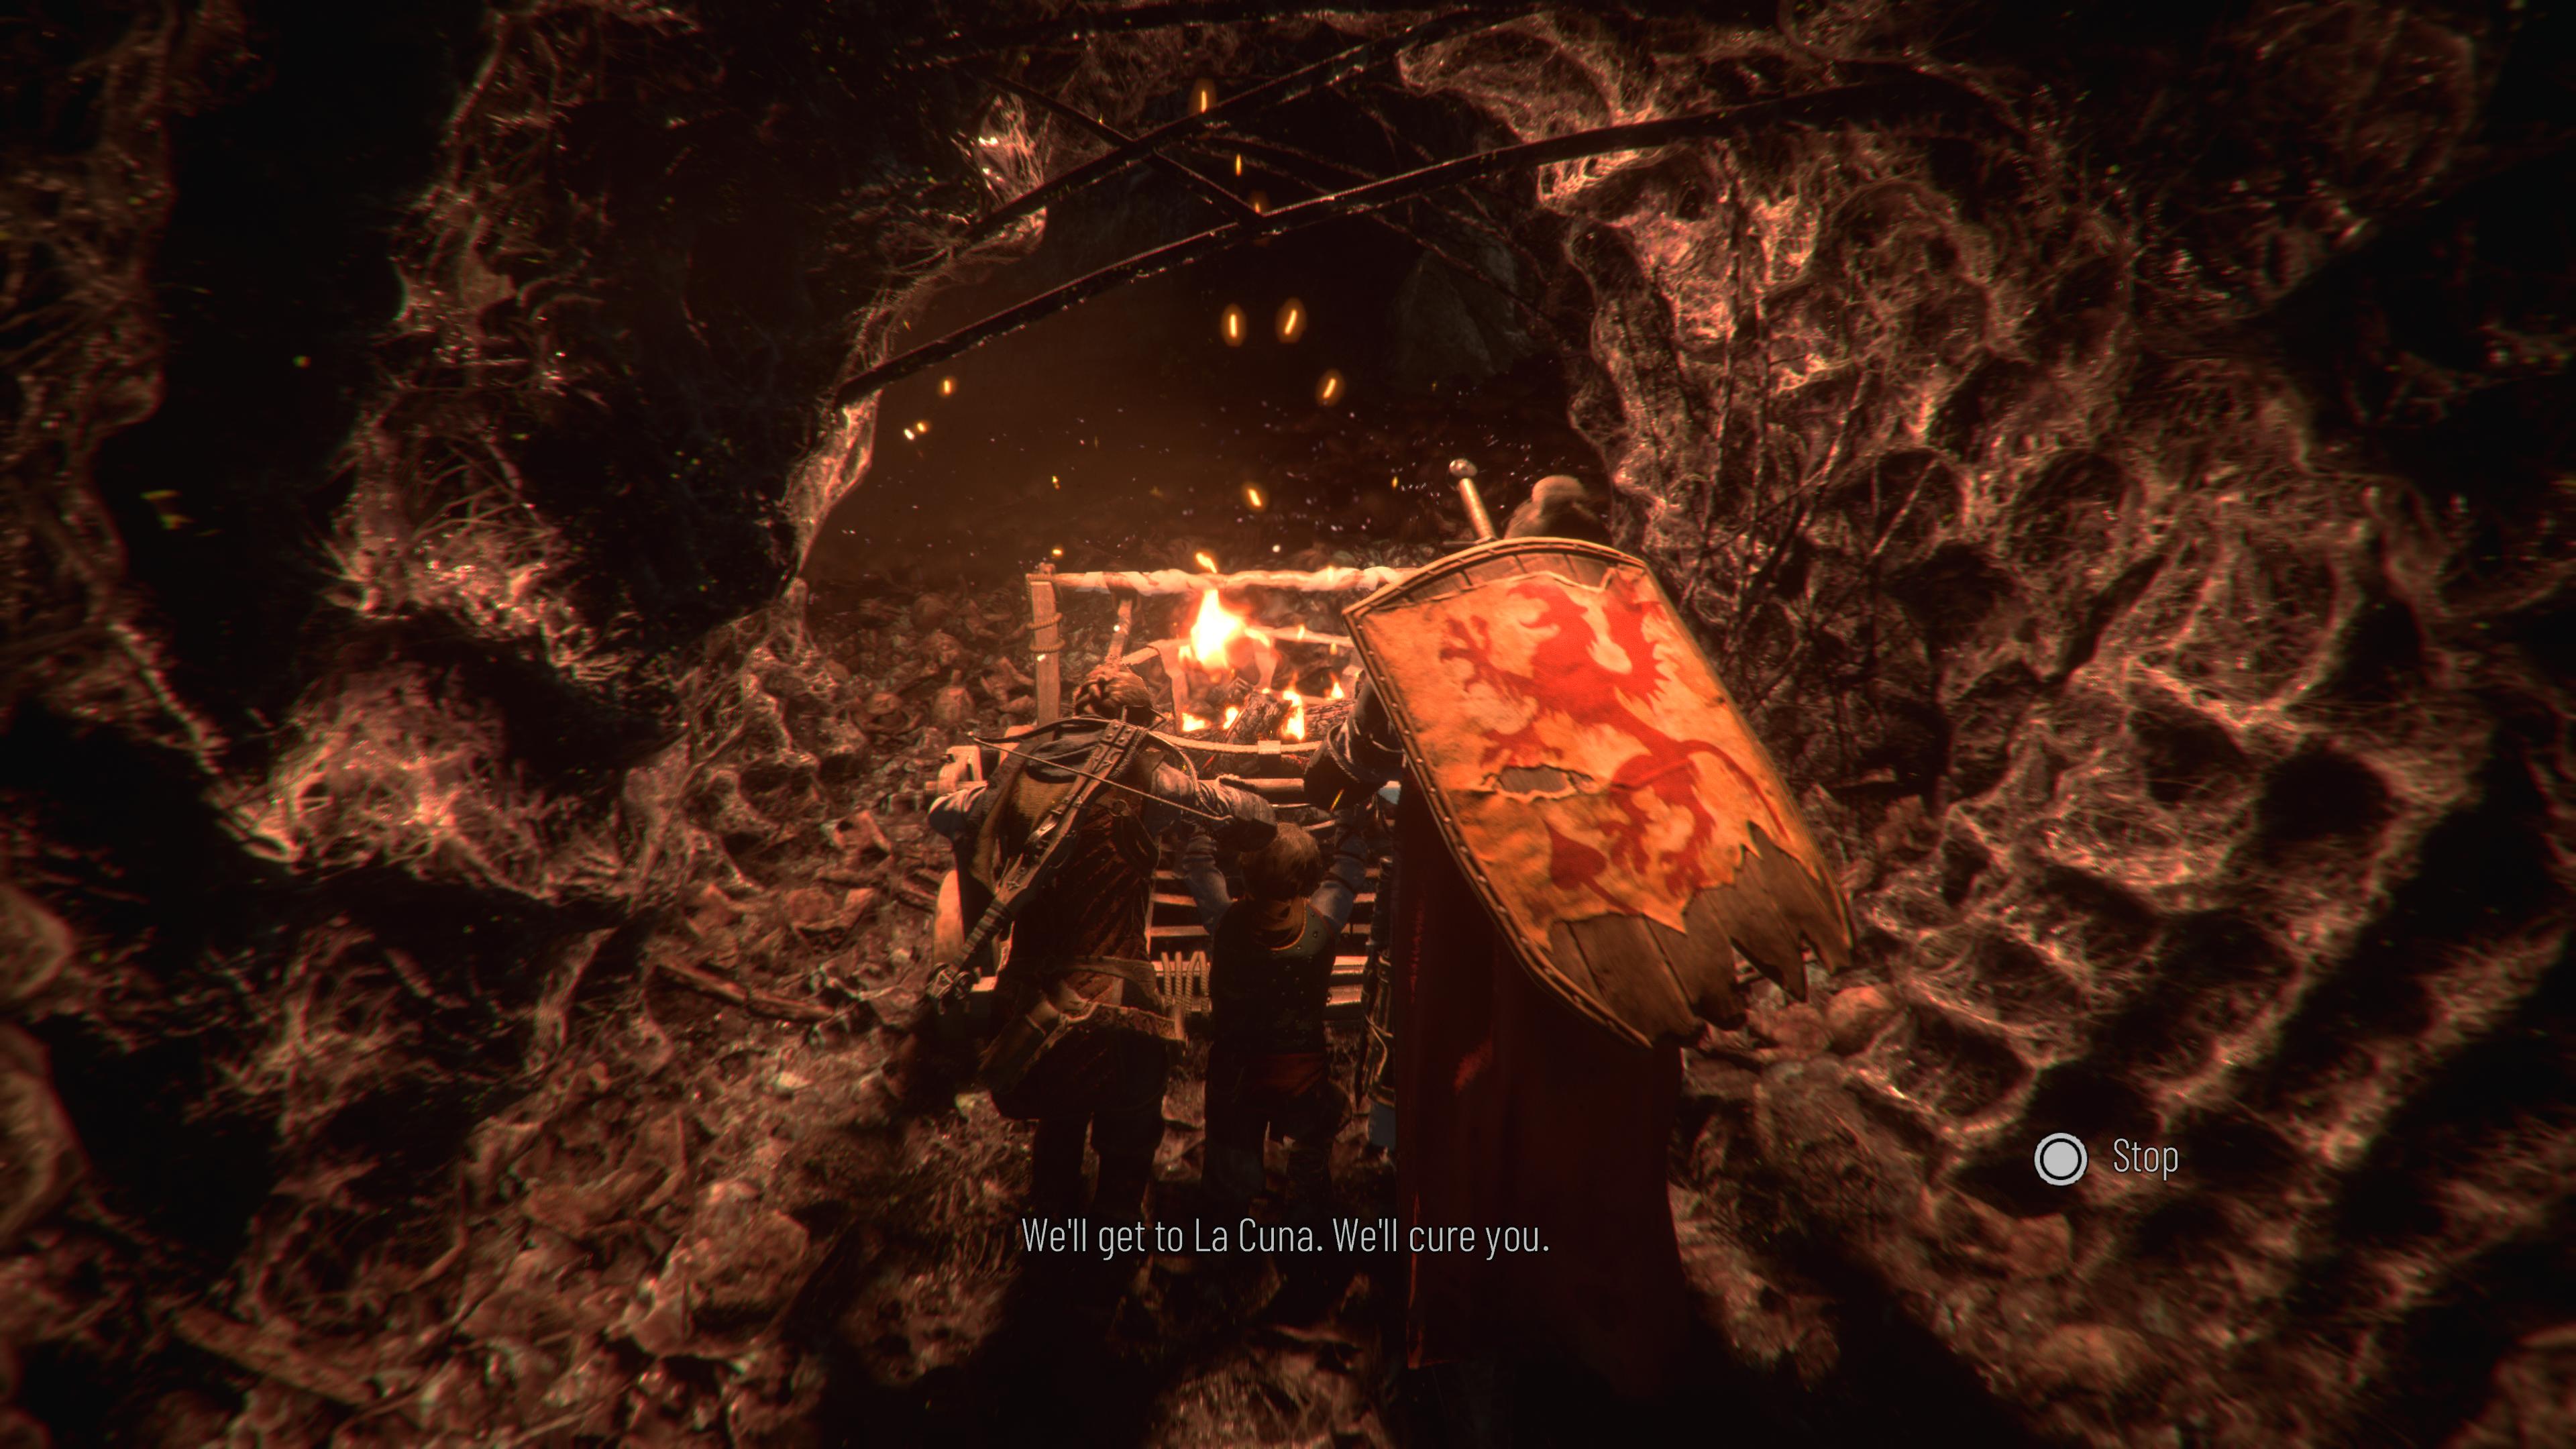 The inside of a rats' nest where three heroes with a burning flame push a cart in the dark.